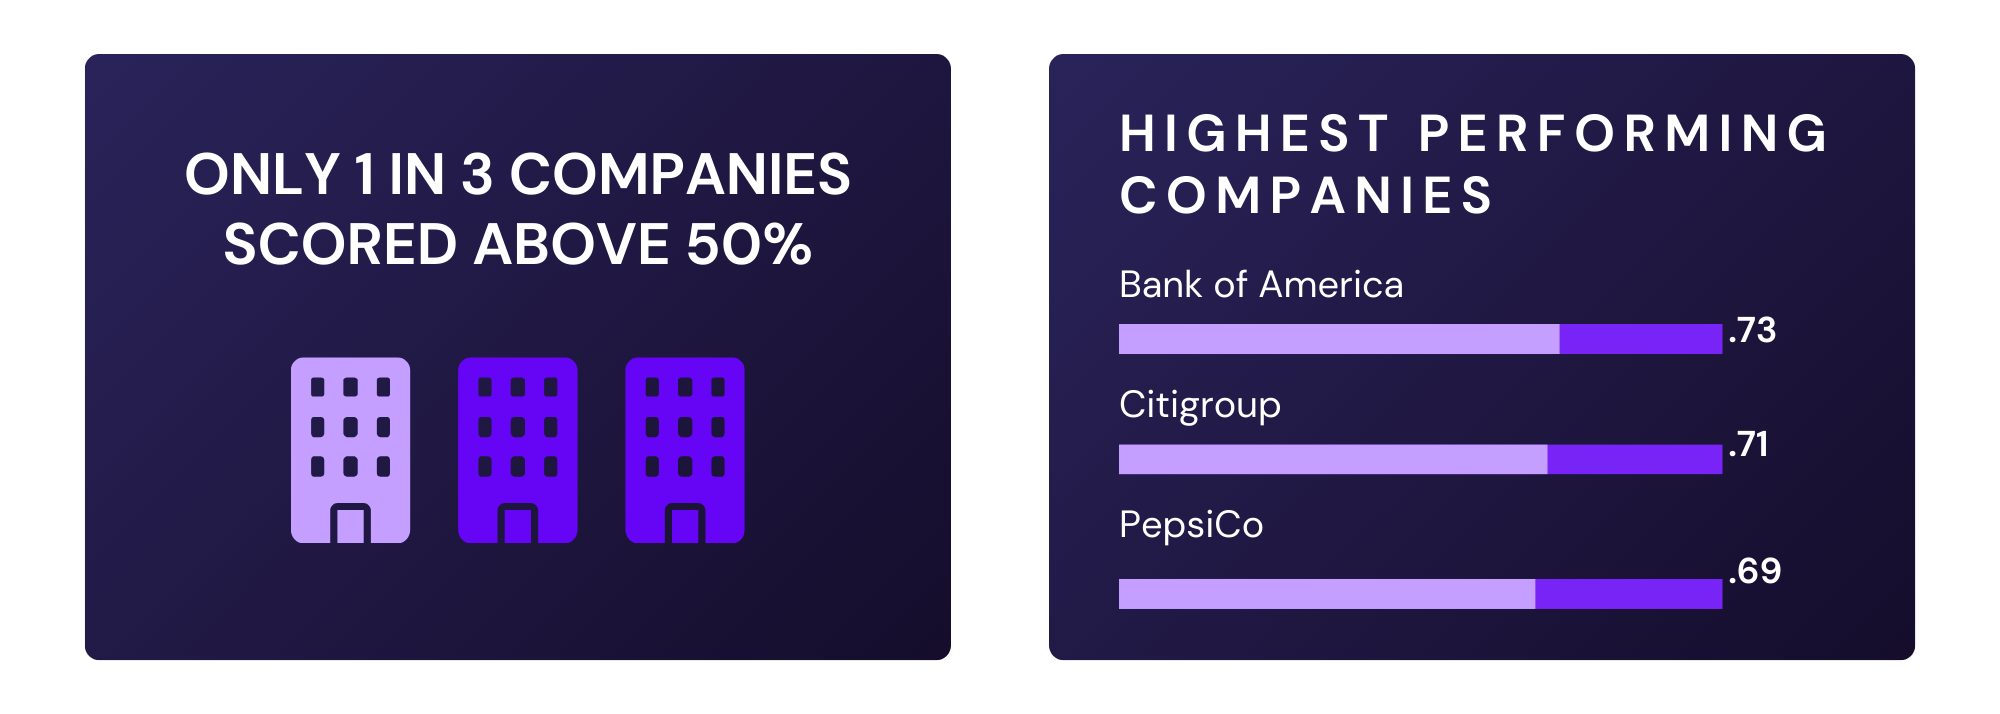 Only 1/3 companies scored above 50% ; top 3 companies